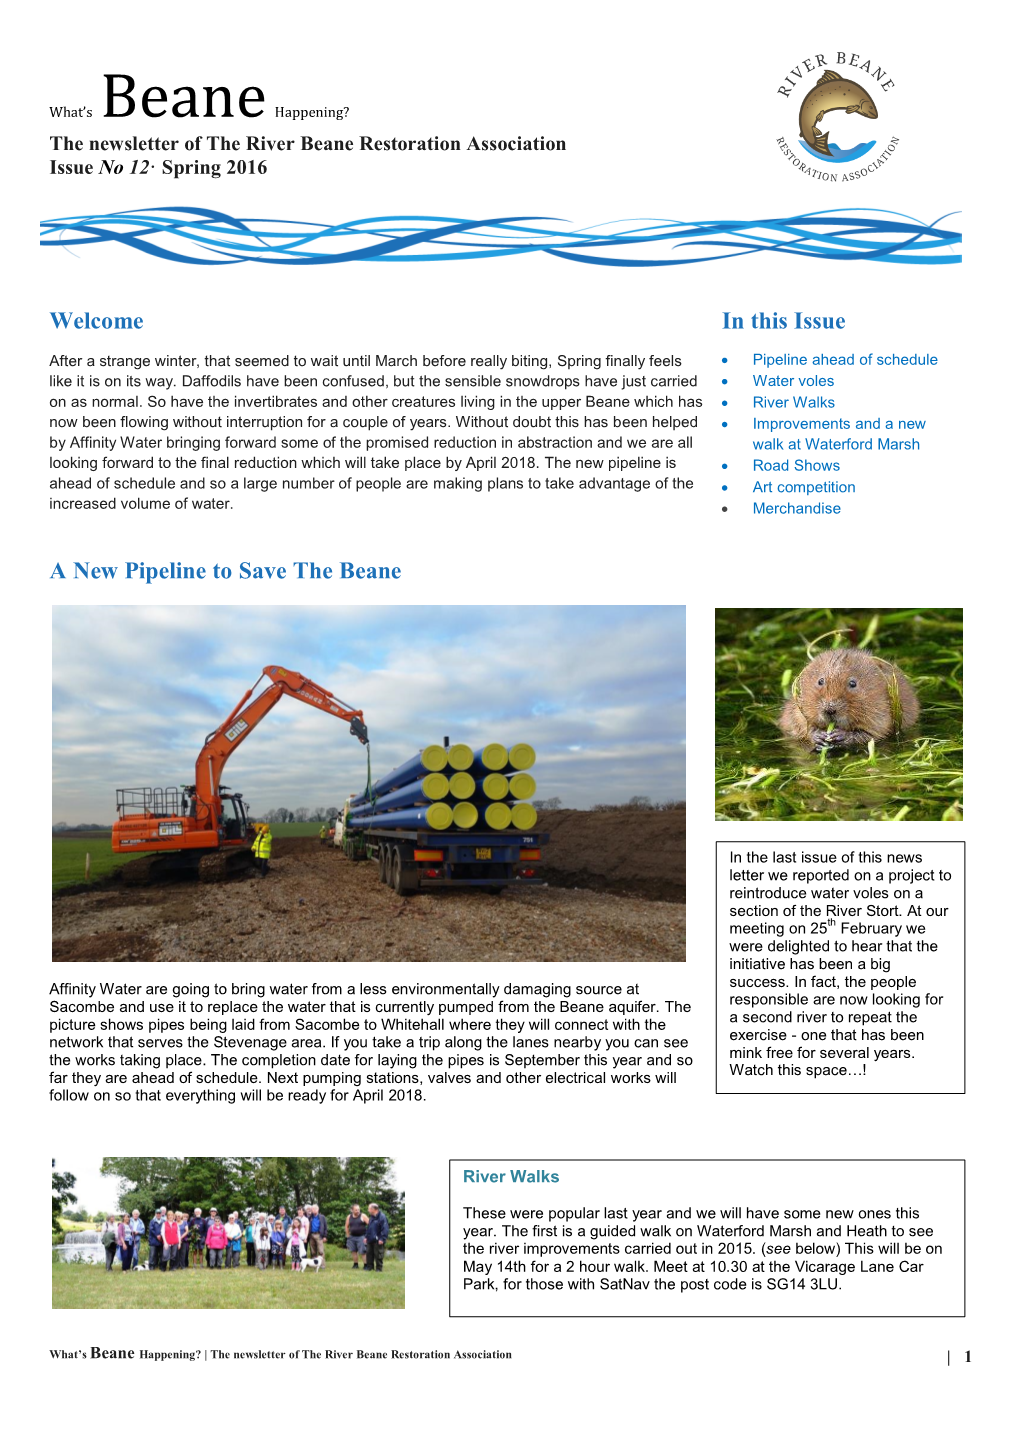 Welcome a New Pipeline to Save the Beane in This Issue